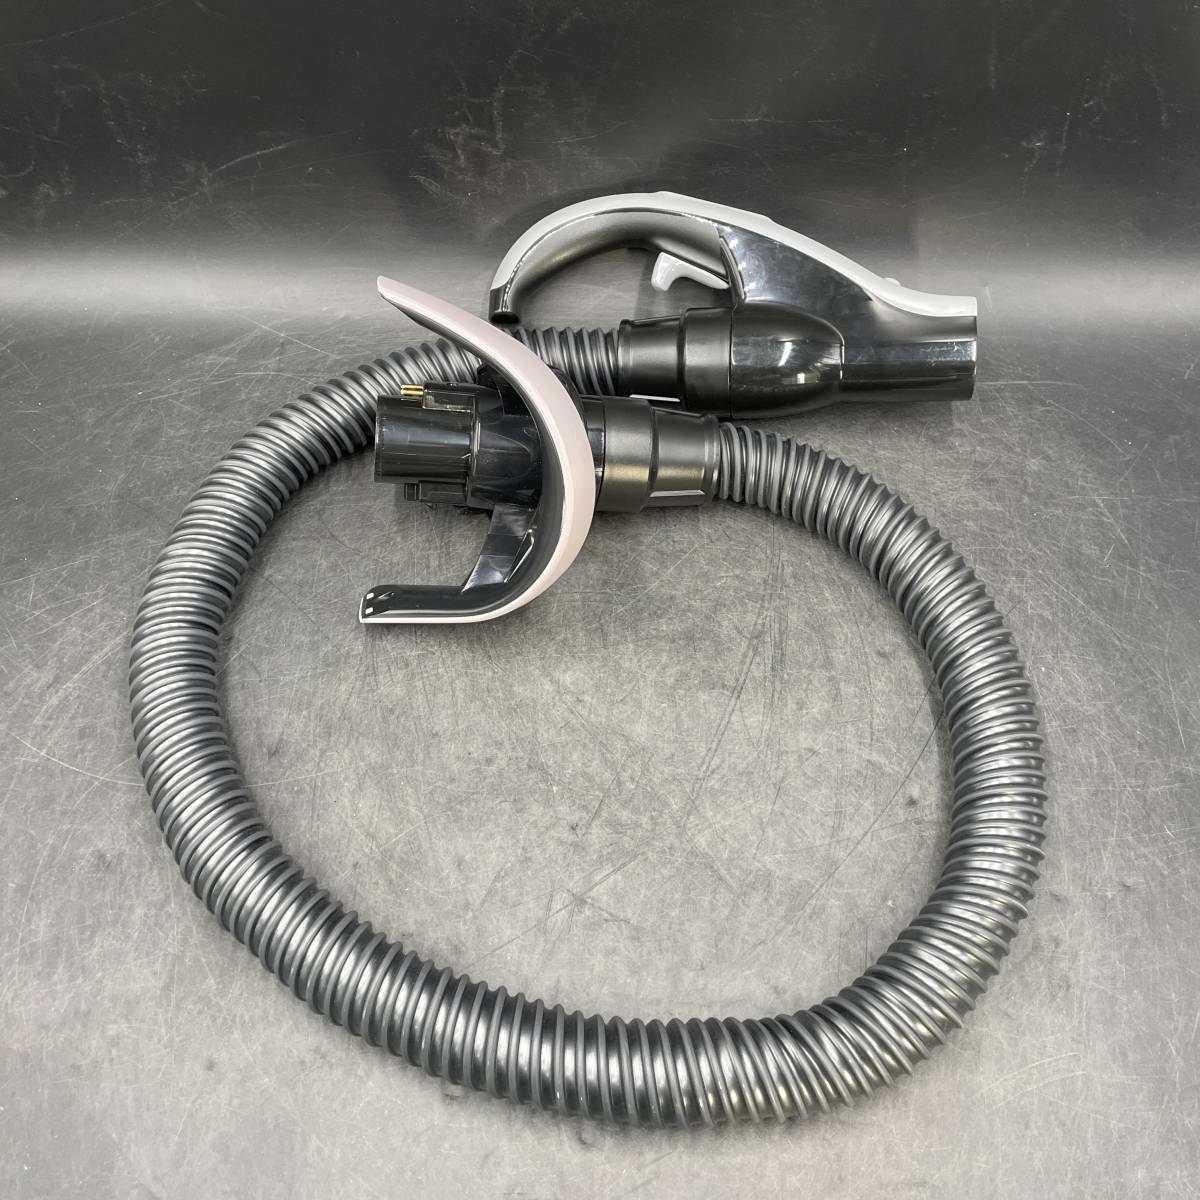 HITACHI/ Hitachi .. hose vacuum cleaner parts switch year end large cleaning [CV-PD500]